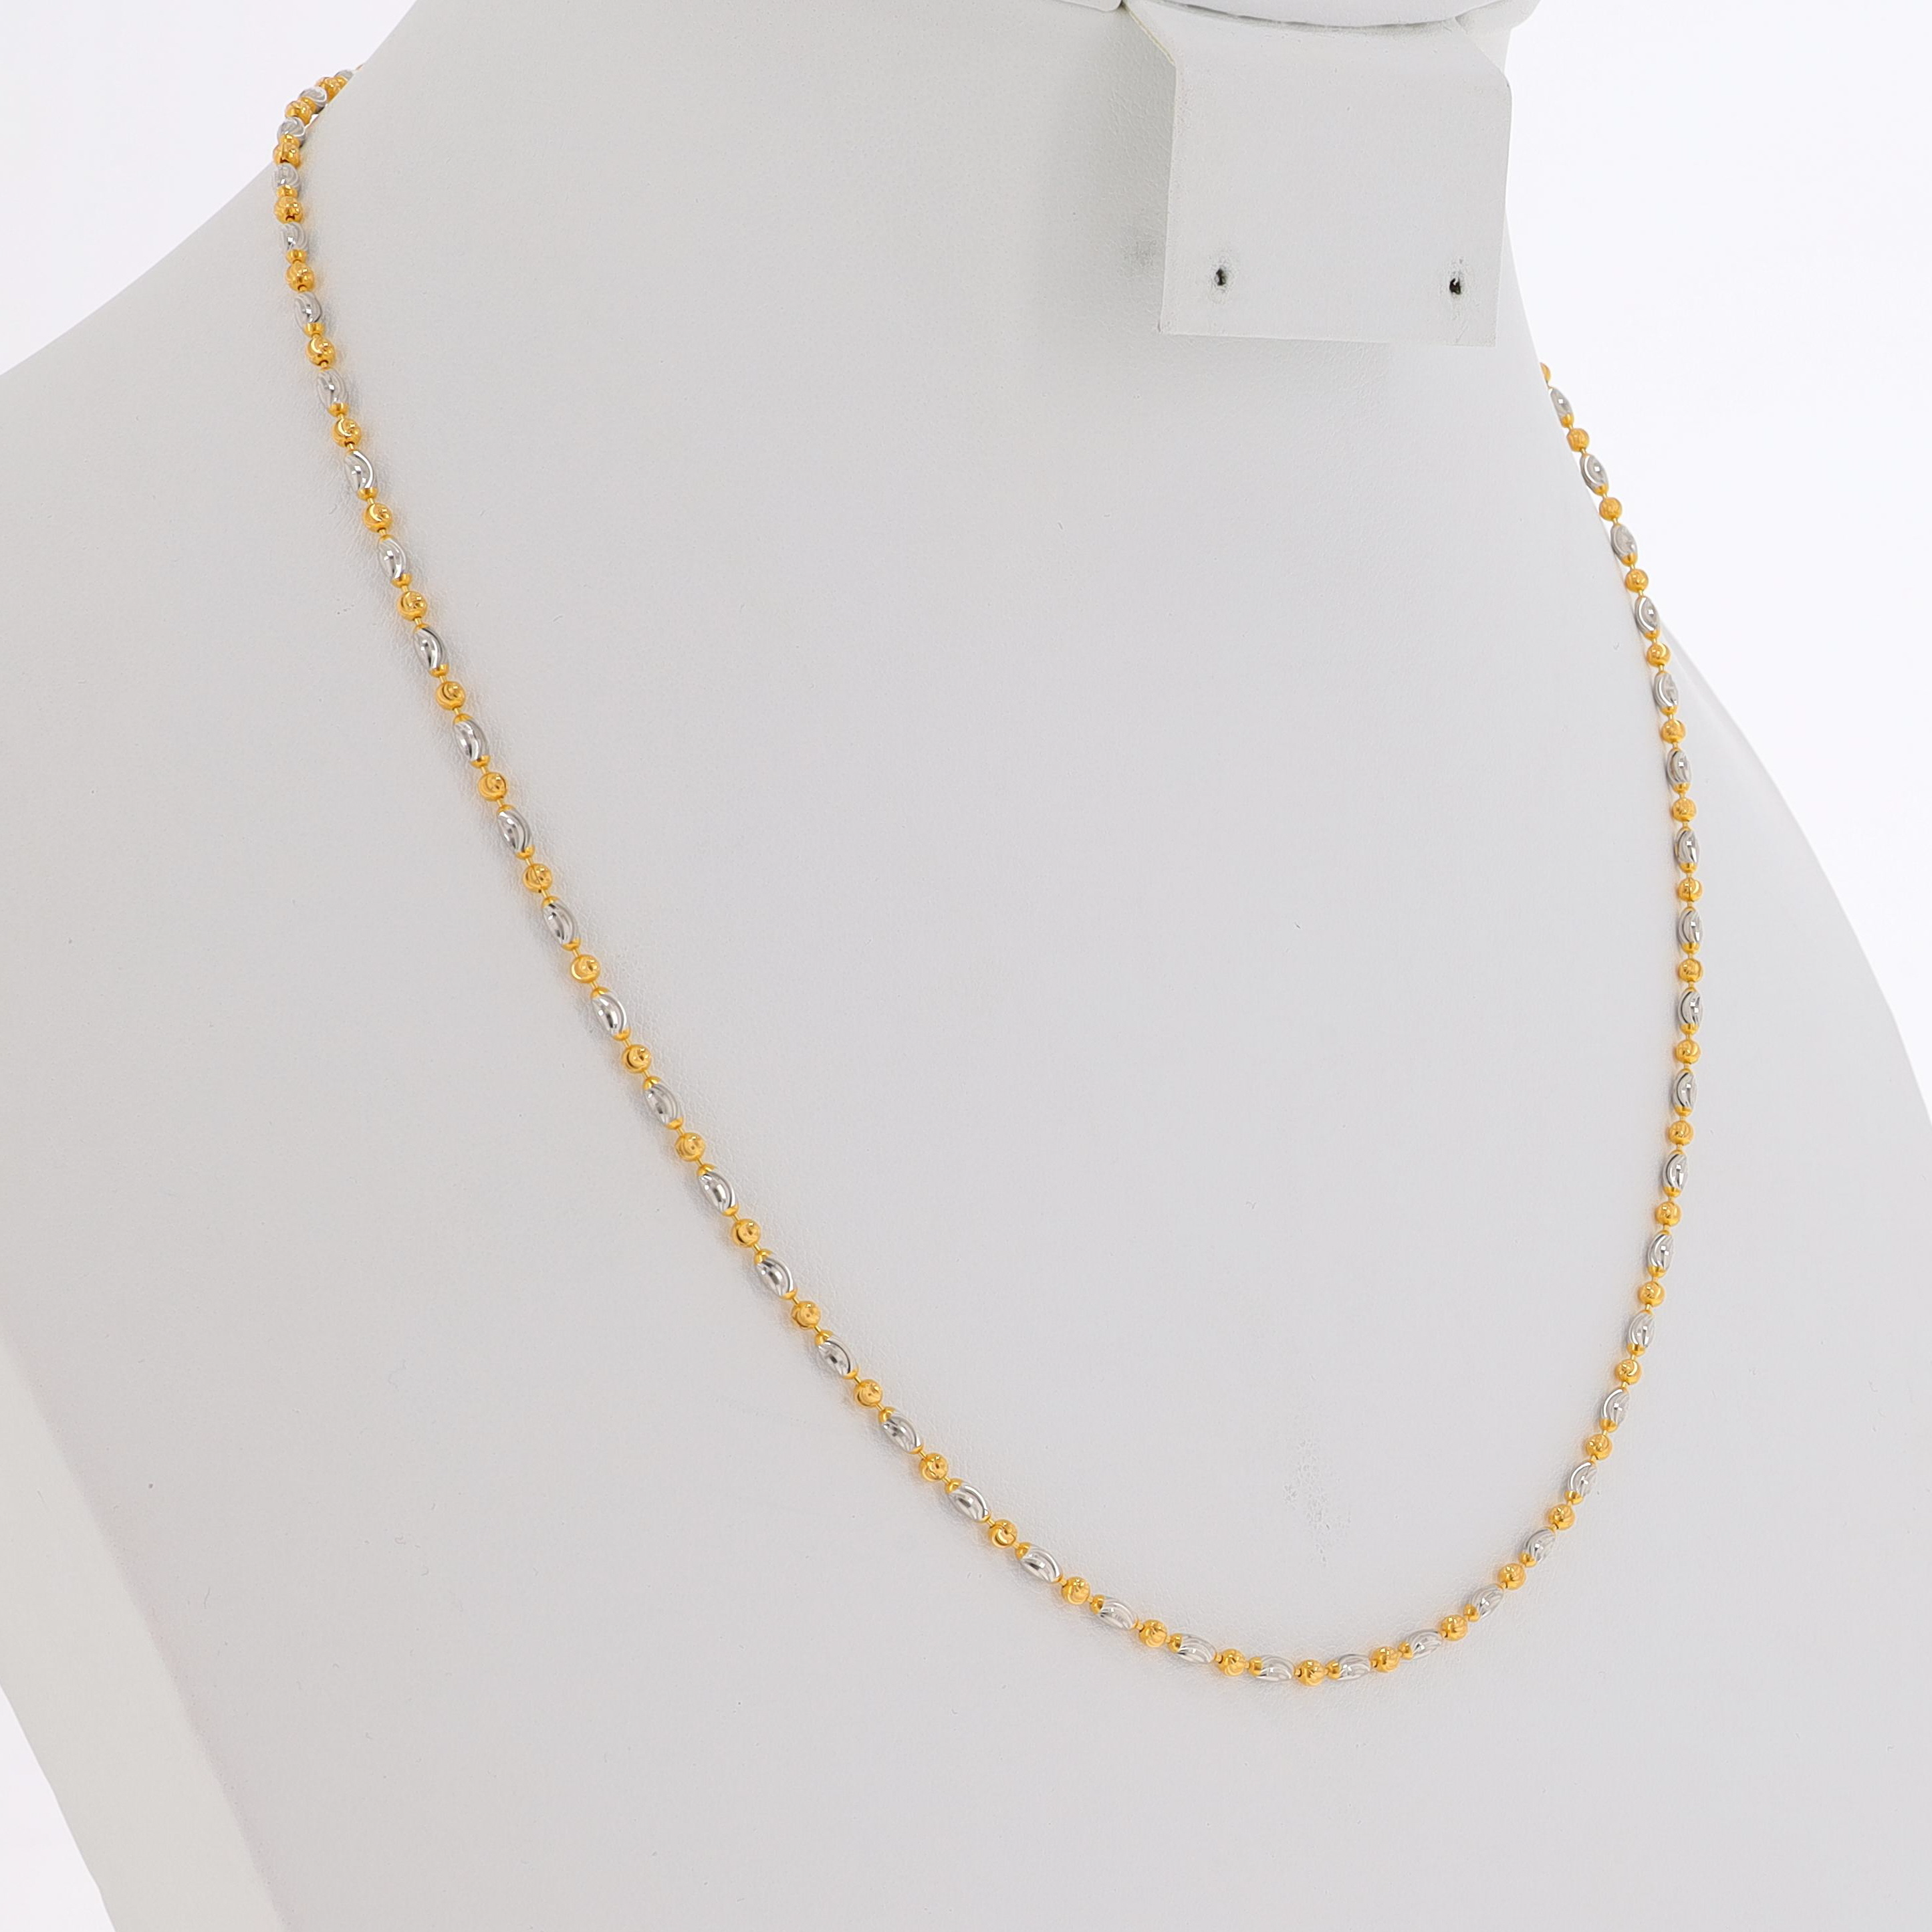 TWO-TONE BEADS CHAIN